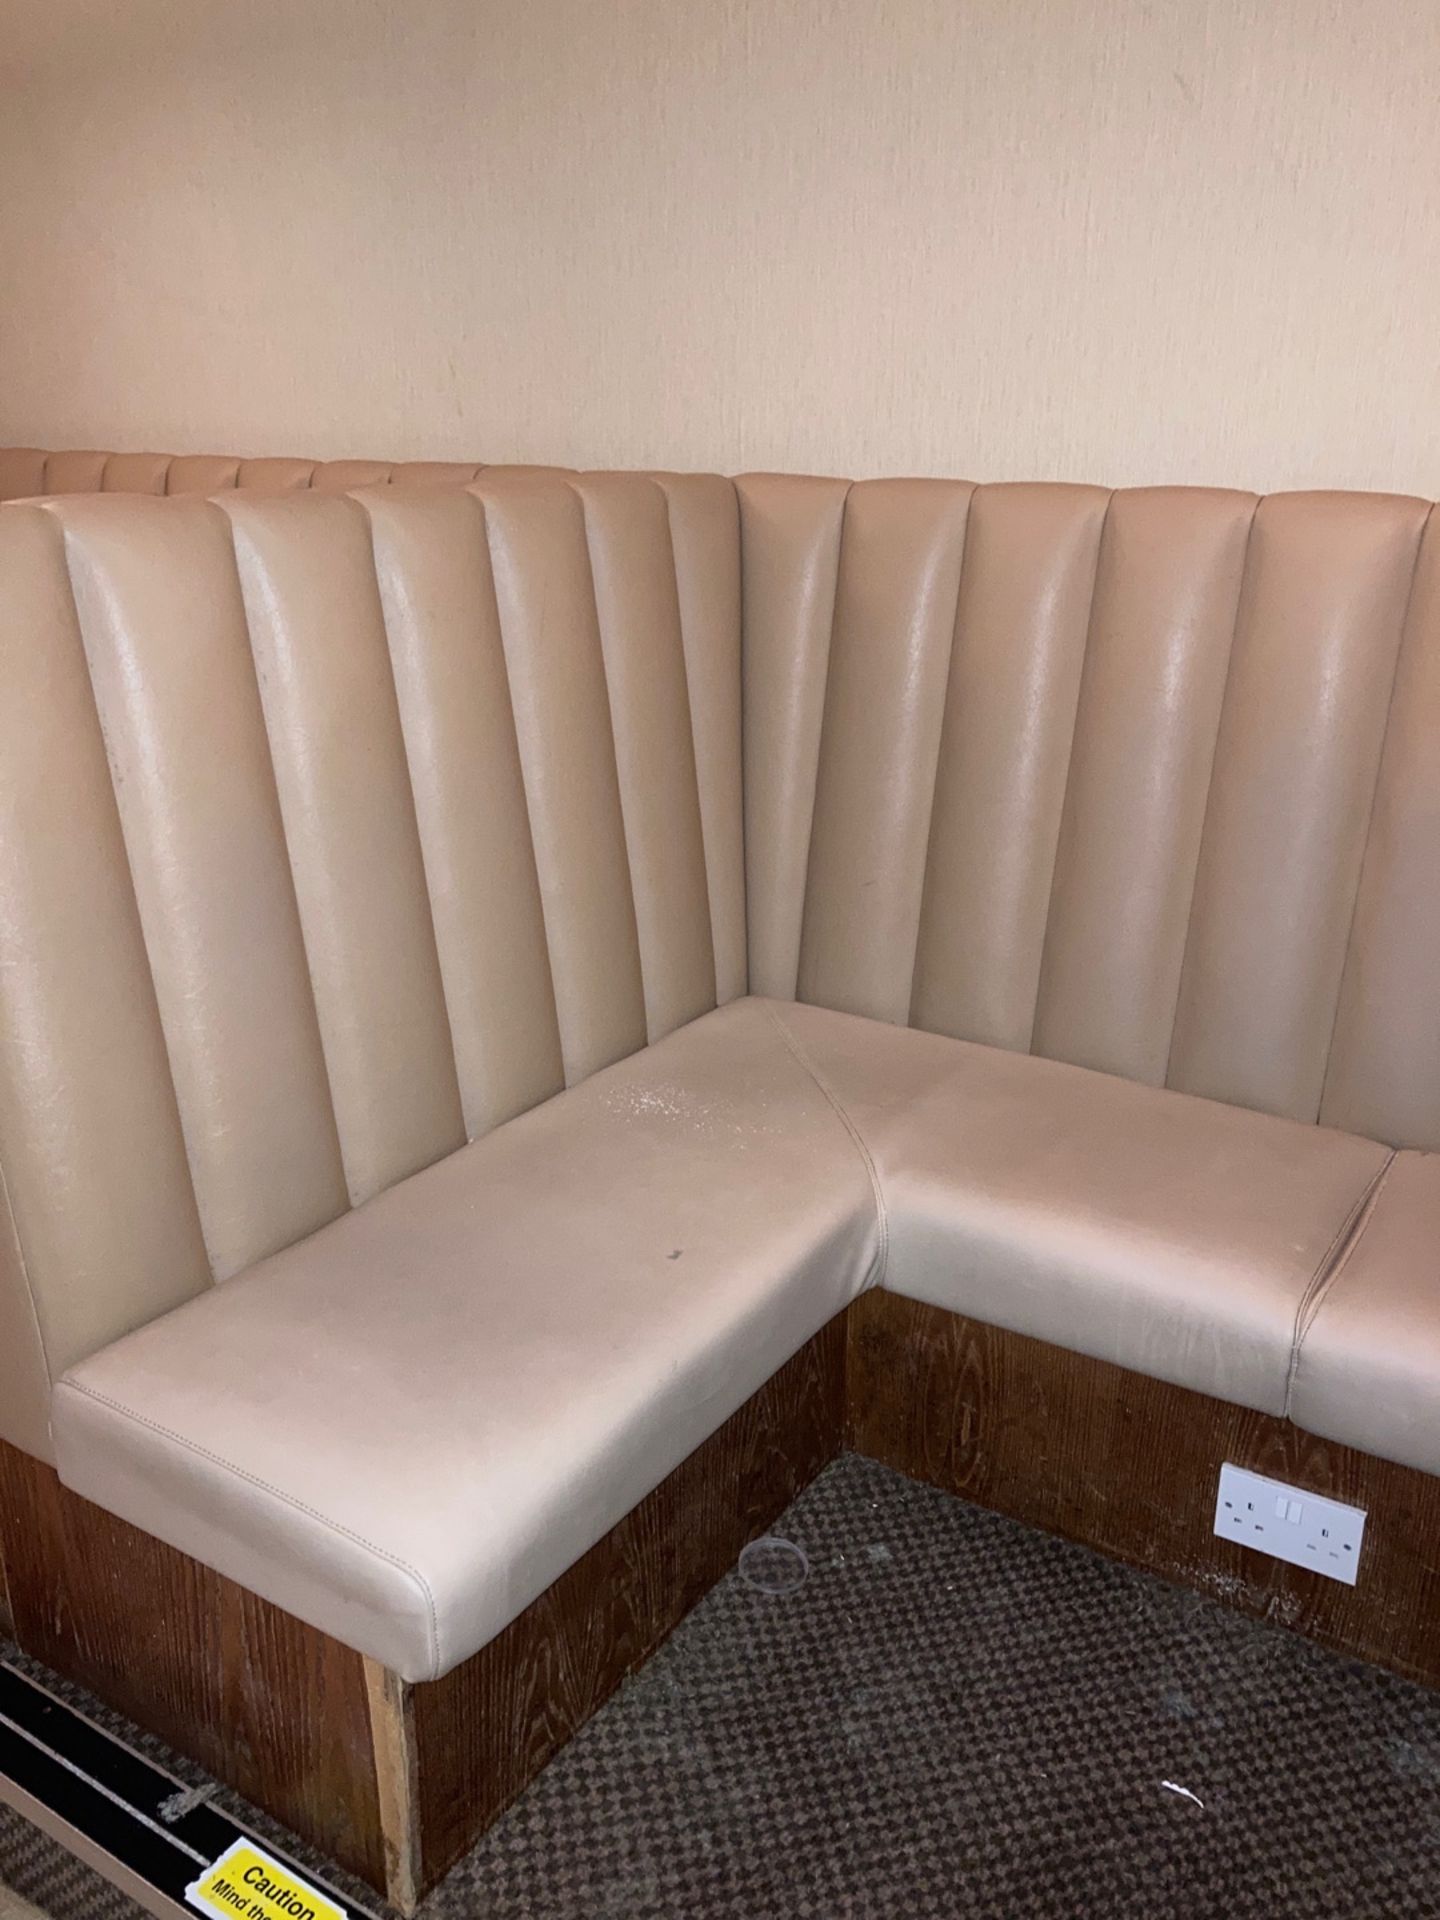 Banquette Seating - Image 2 of 4